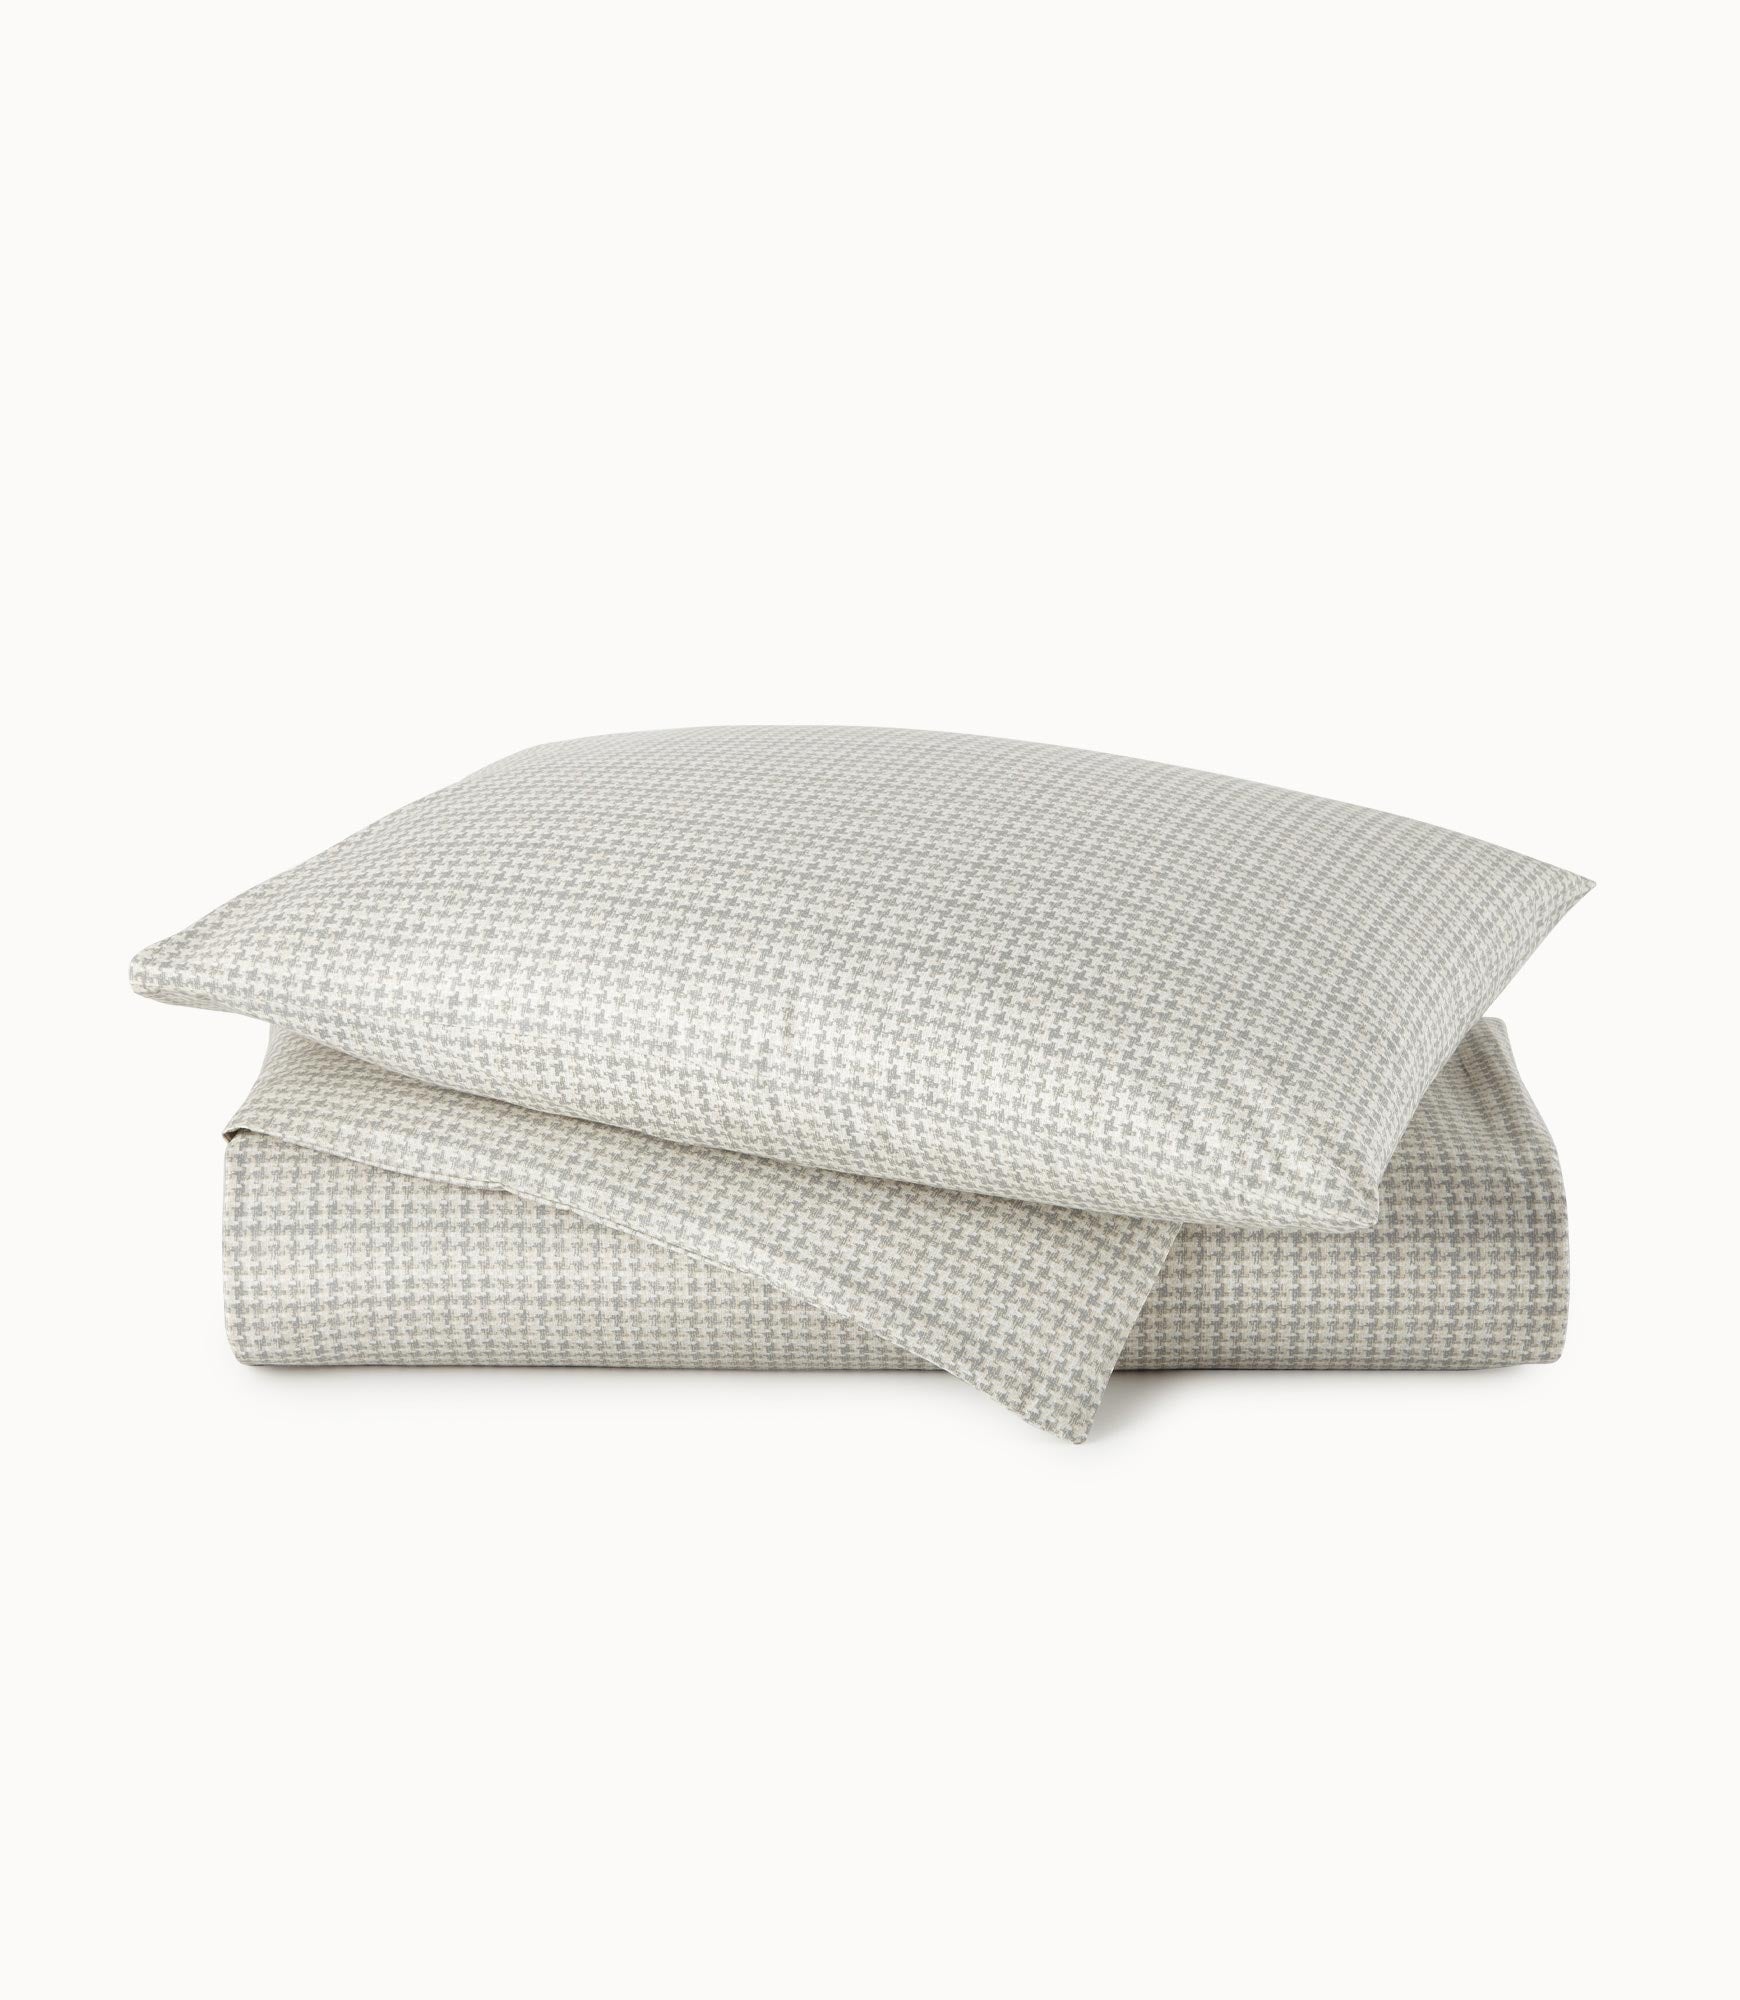 Houndstooth Percale Duvet Cover Greige